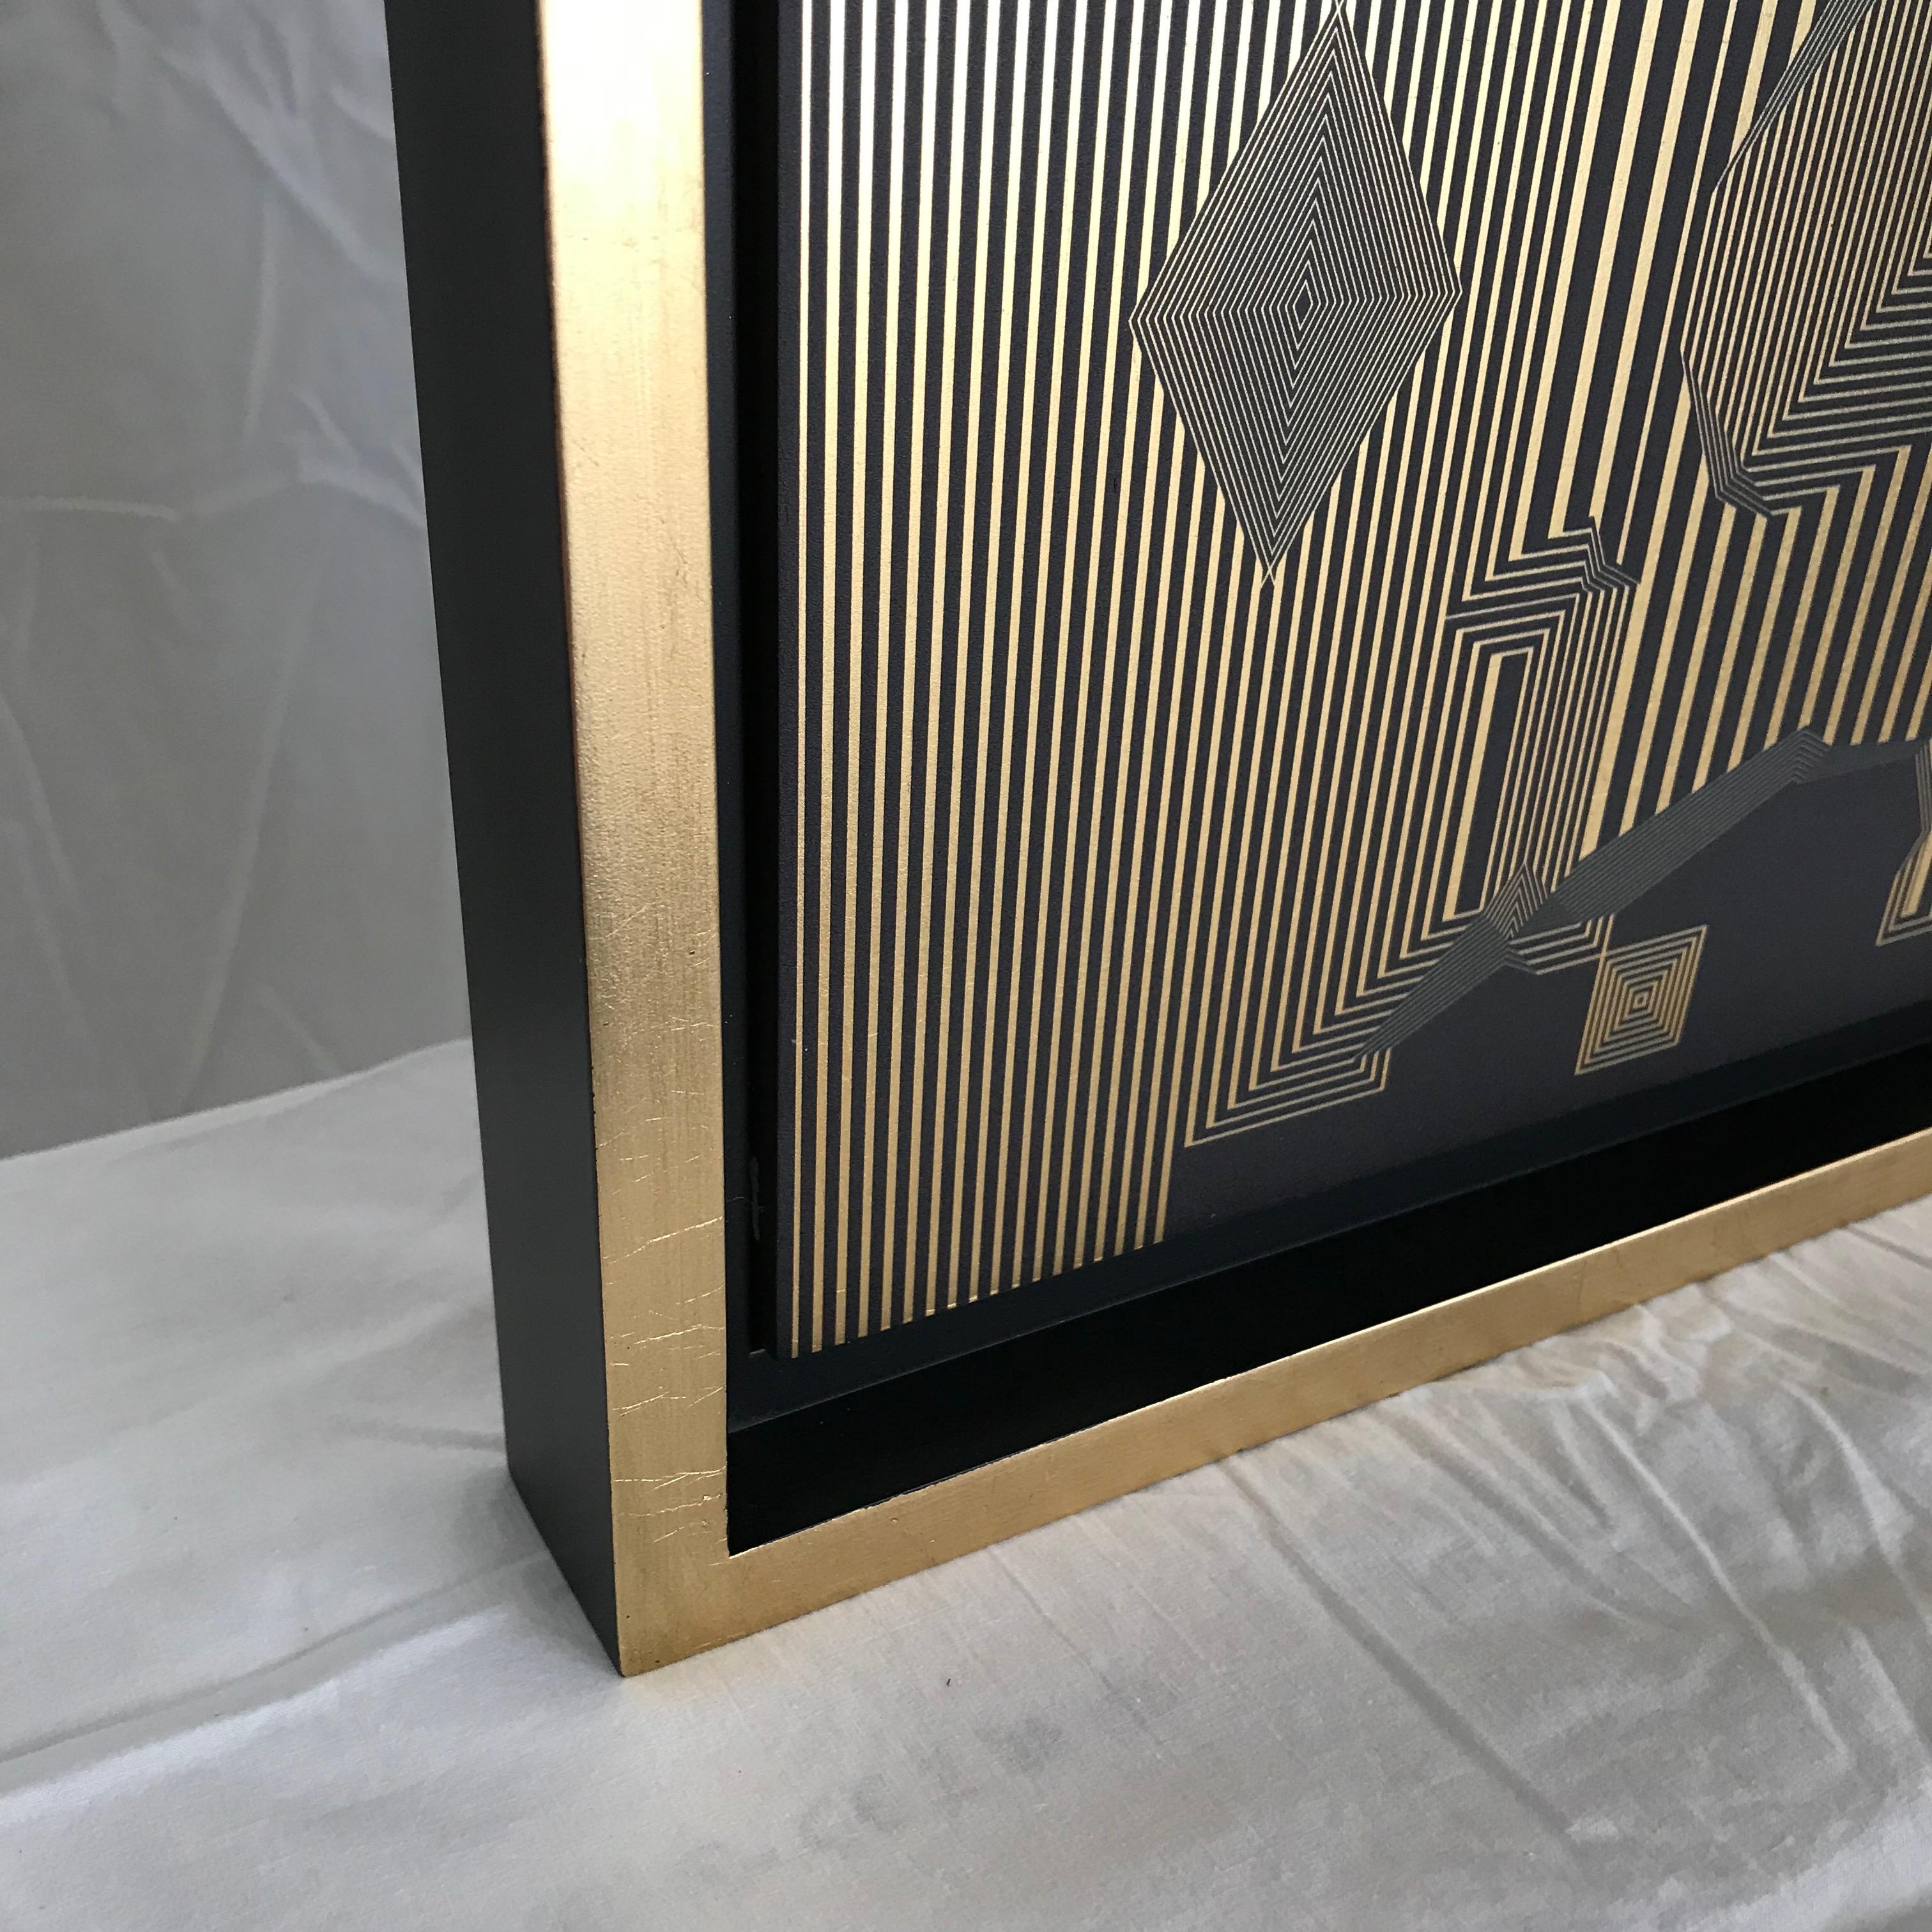 Untitled 15, 2019 by Francisco Larios
Lacquer, Acrylic, oil, and gold leaf on MDF Deep
Image Size: 11.5 in. H x 9.5 in. W
Frame Size: 14 in. H x 11.6 in. W x 1.5 in. D
One of a kind

* Francisco Larios works with painting, open concept drawing and